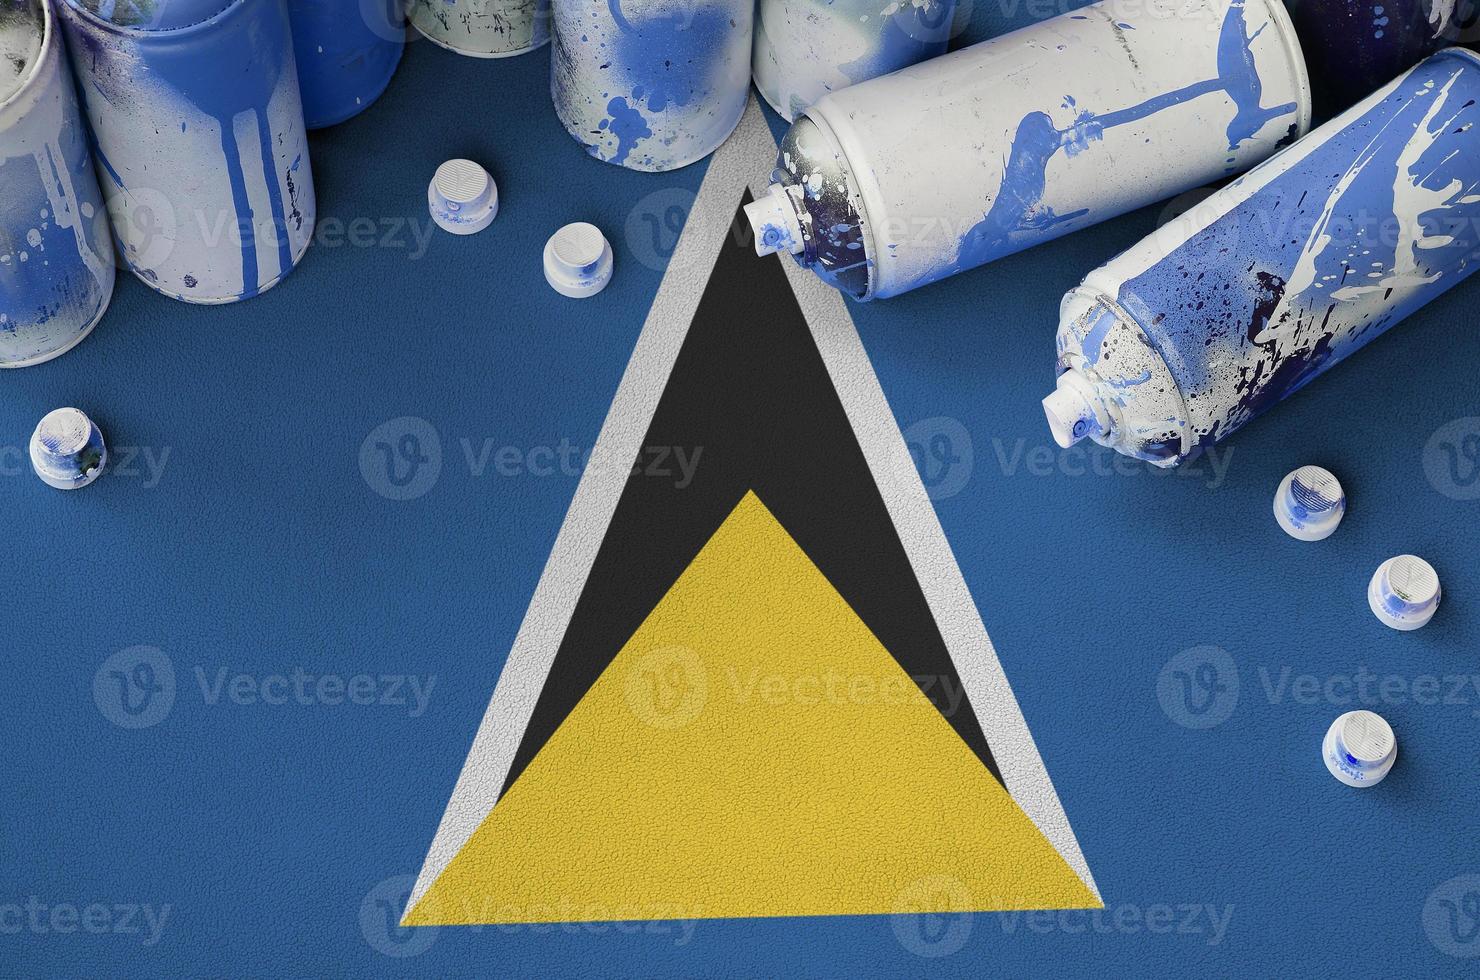 Saint Lucia flag and few used aerosol spray cans for graffiti painting. Street art culture concept photo